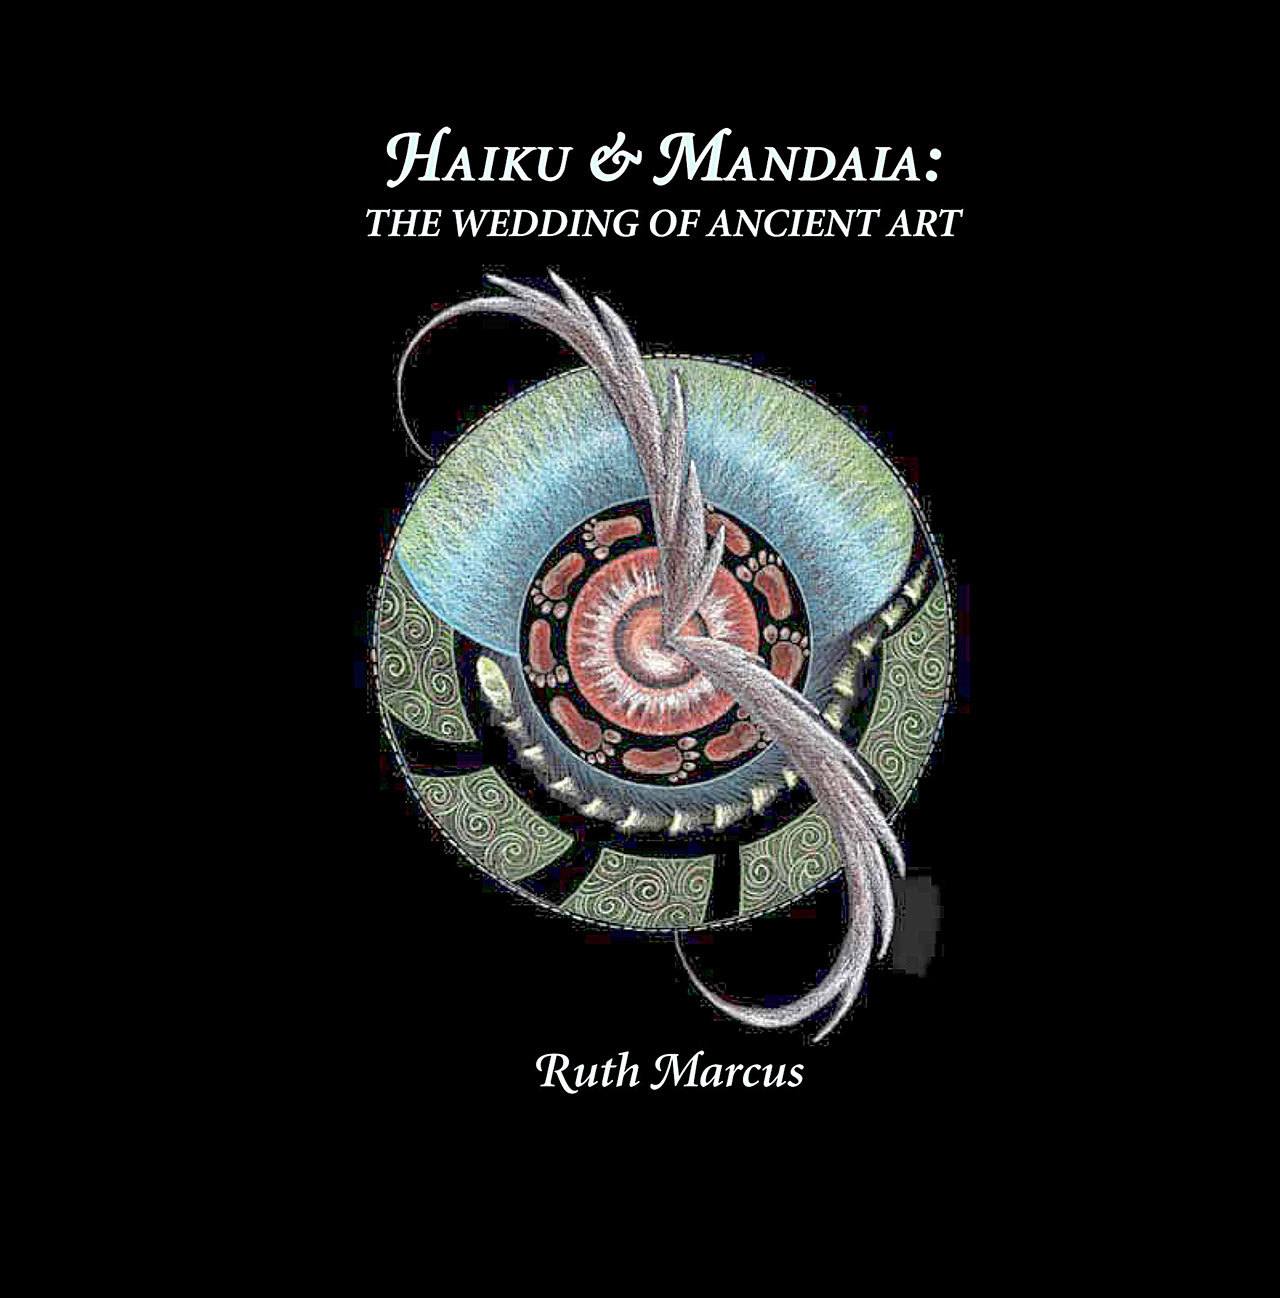 Copies of “Haiku & Mandala: The Wedding of Ancient Art” — published by Wide Awake Publishing — will be available at local bookstores and online at Amazon beginning in January. (Wide Awake Publishing)